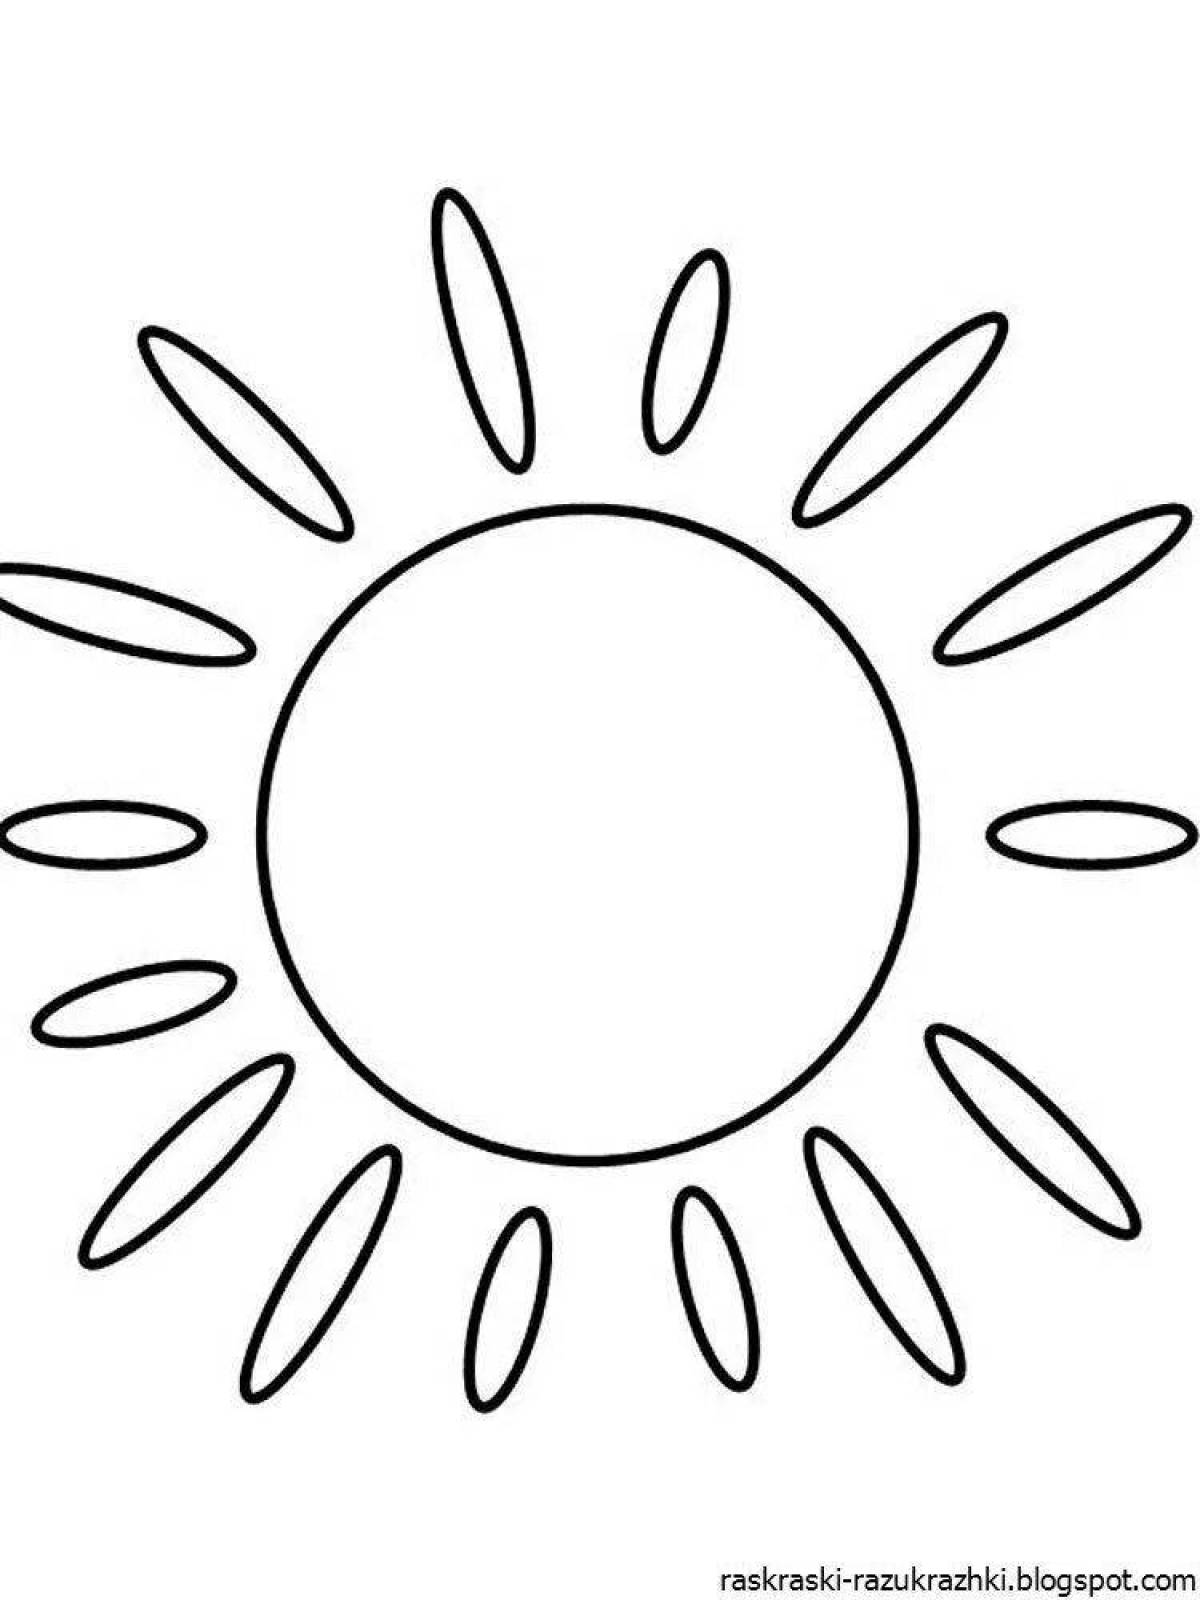 Charming sun coloring book for kids 2-3 years old